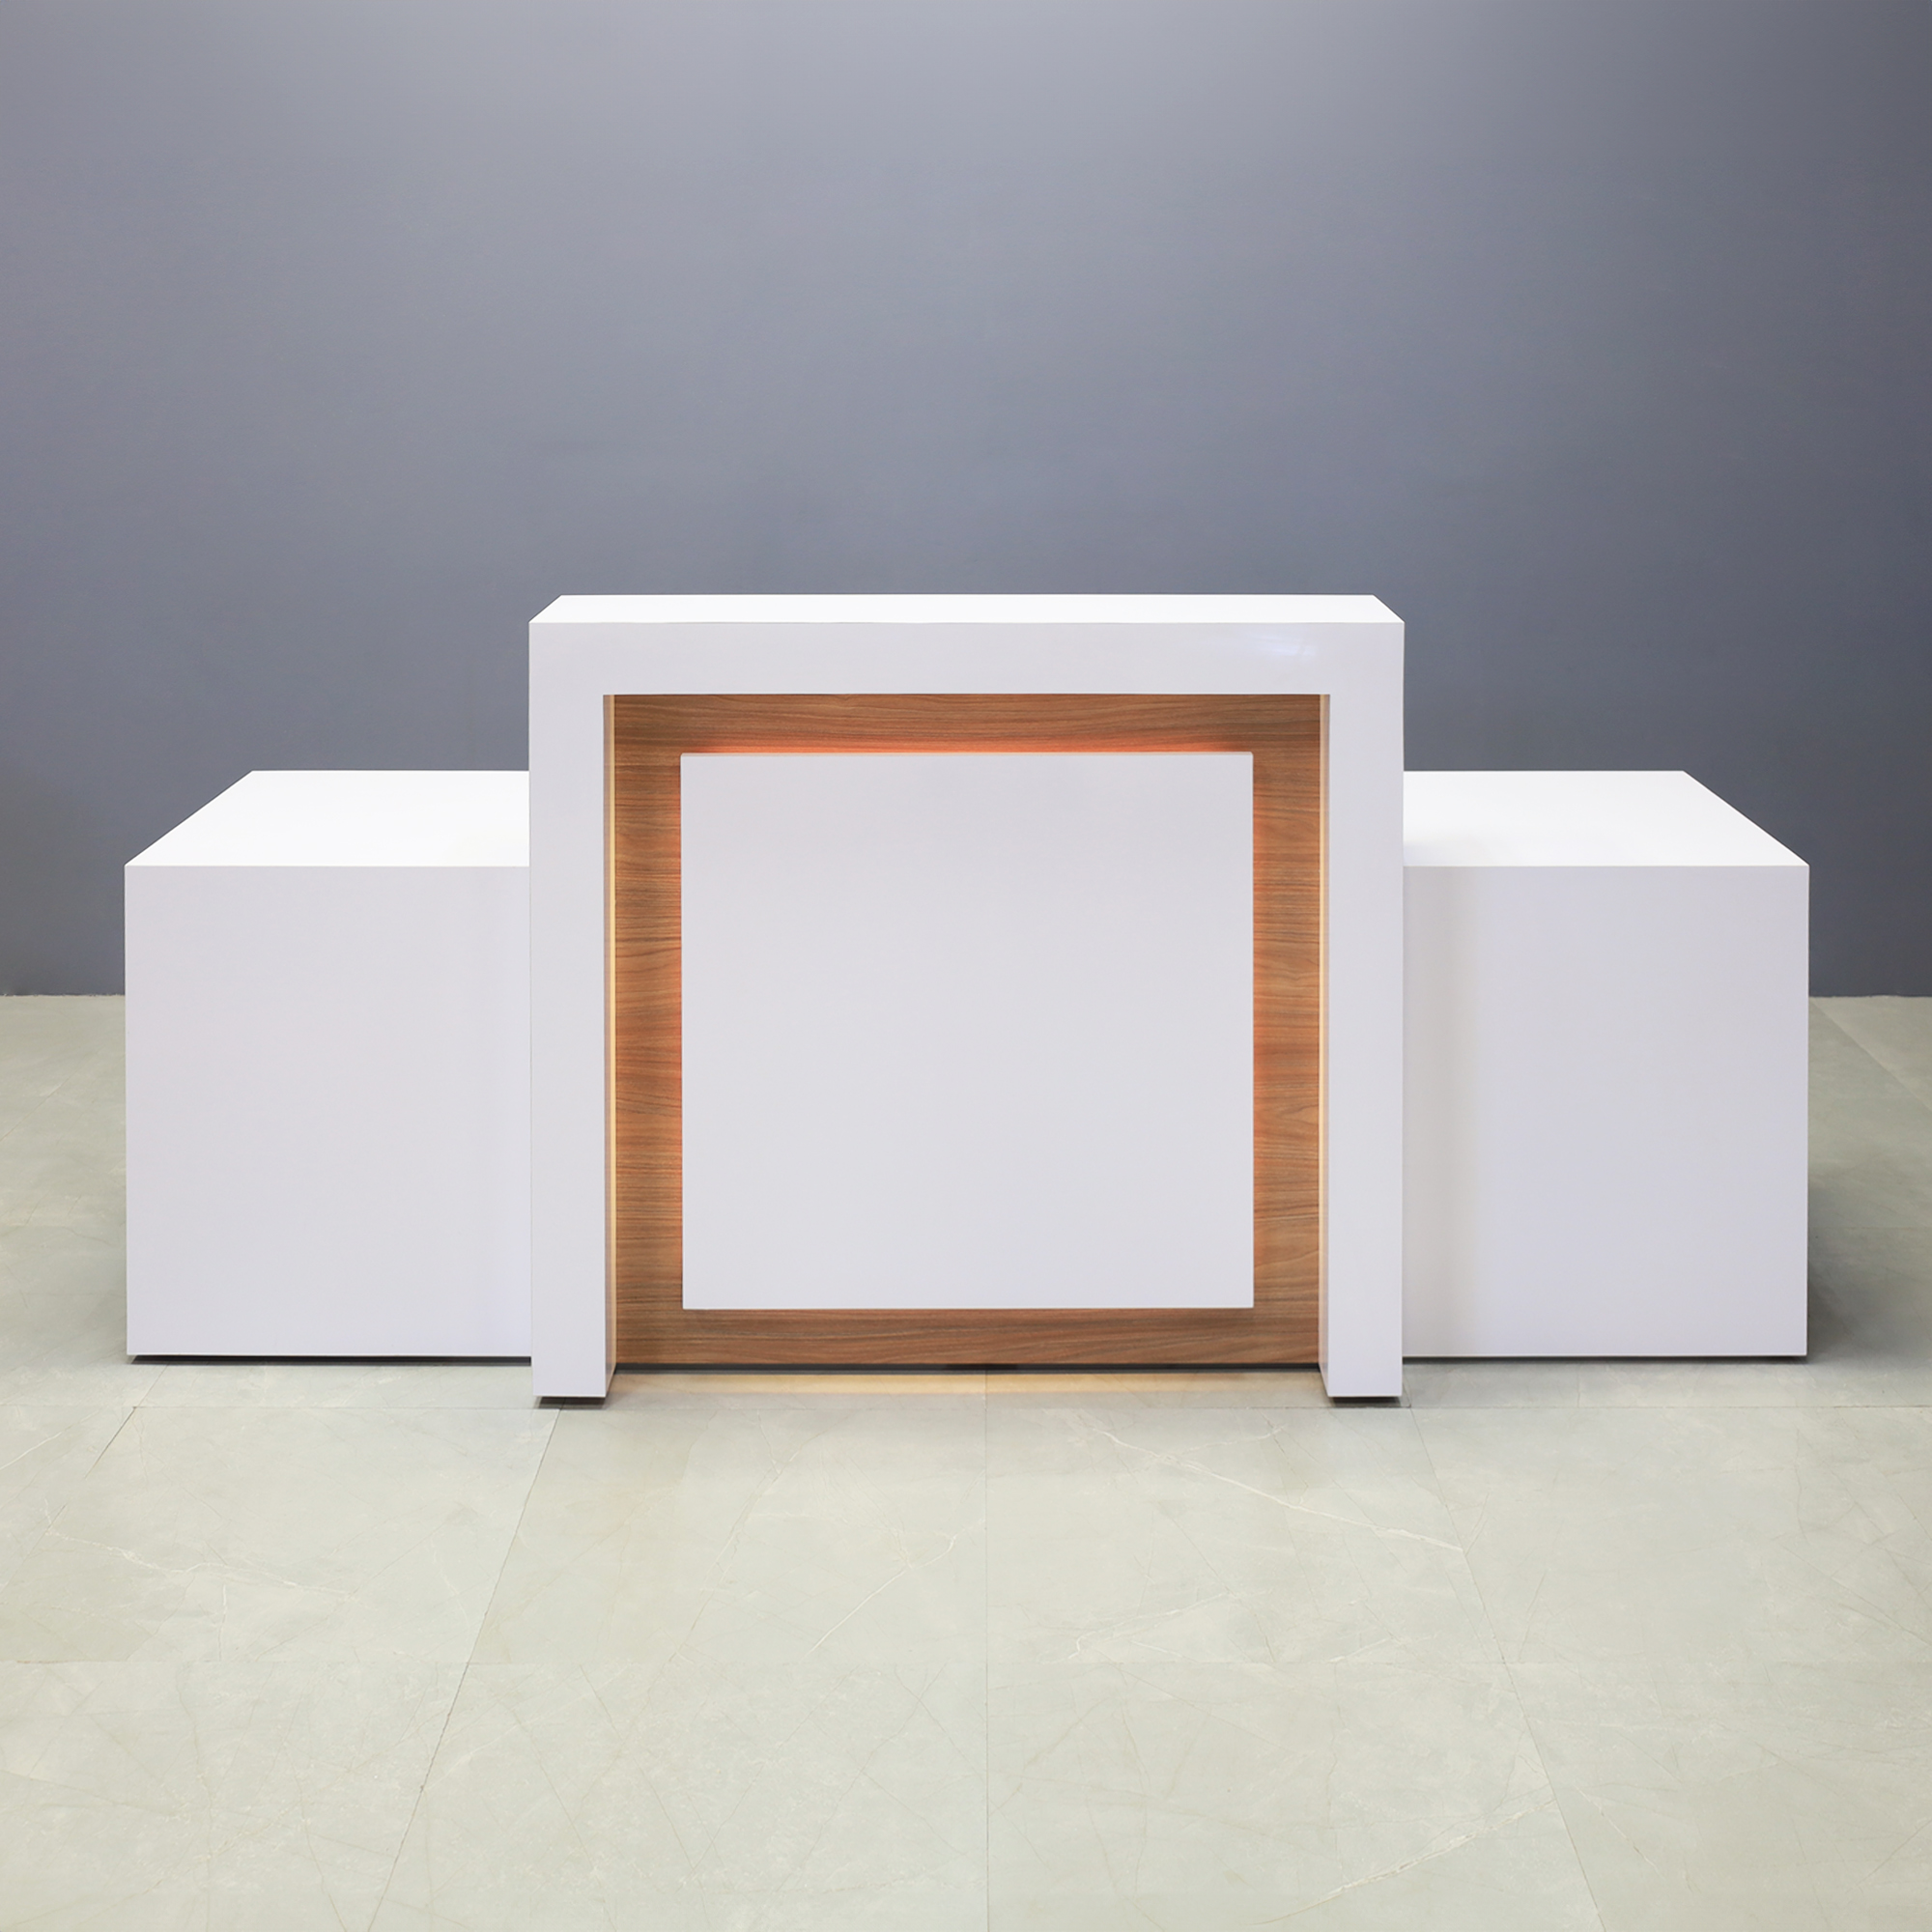 96-inch New York Extra Wide in white gloss laminate main desk and uptown walnut (discontinued) matte laminate recess accent, with multi-colored LED, shown here.